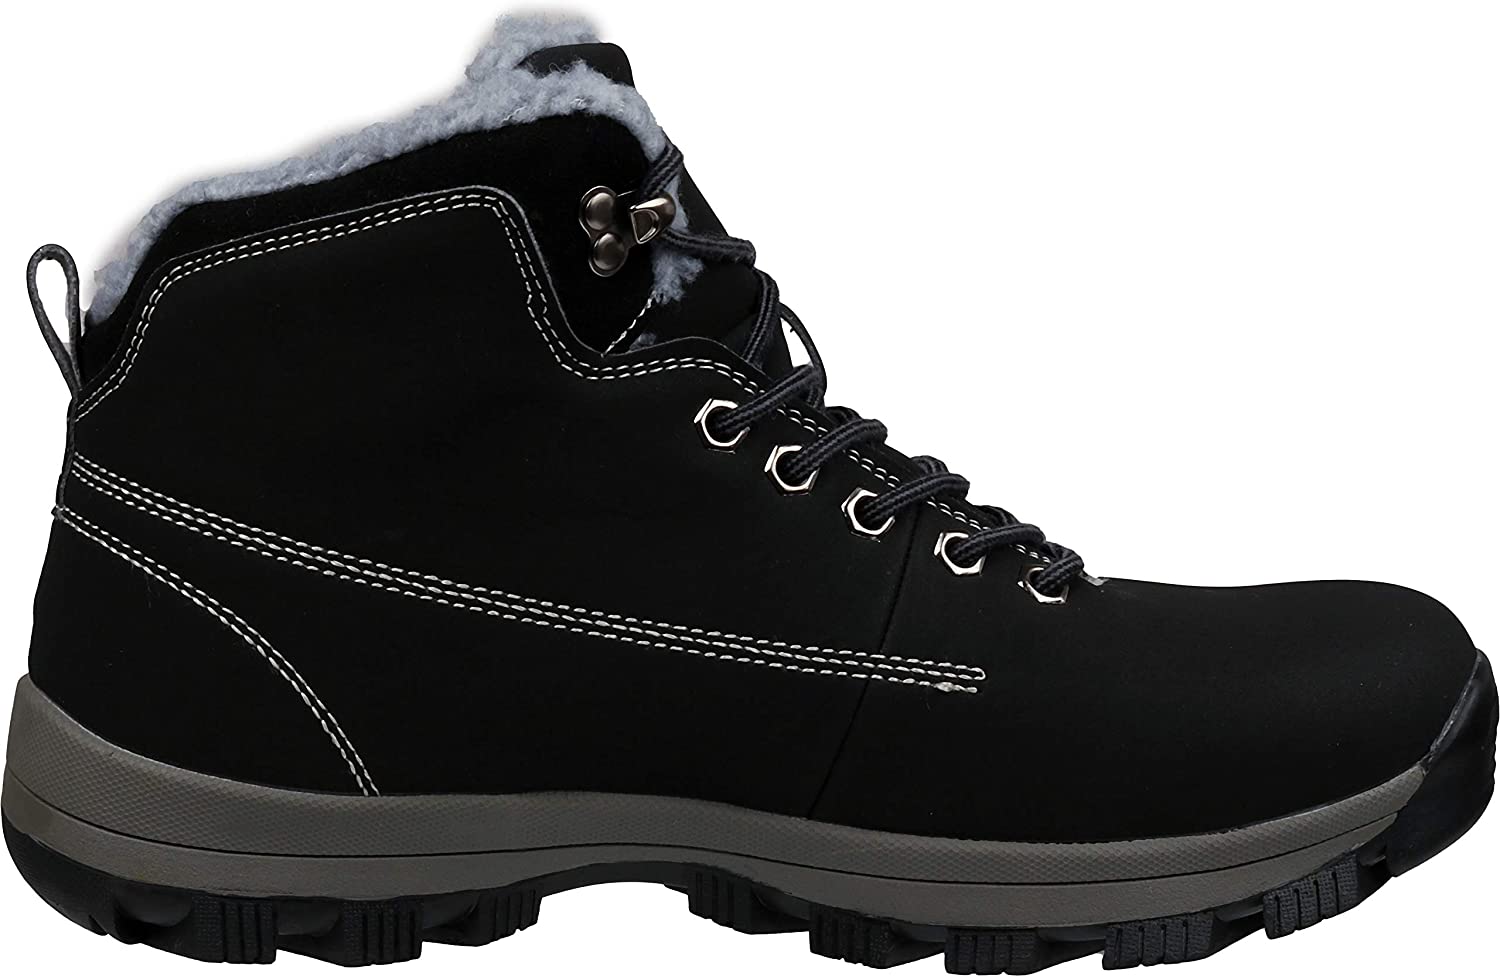 WHITIN Mens Insulated All-Weather Boots 